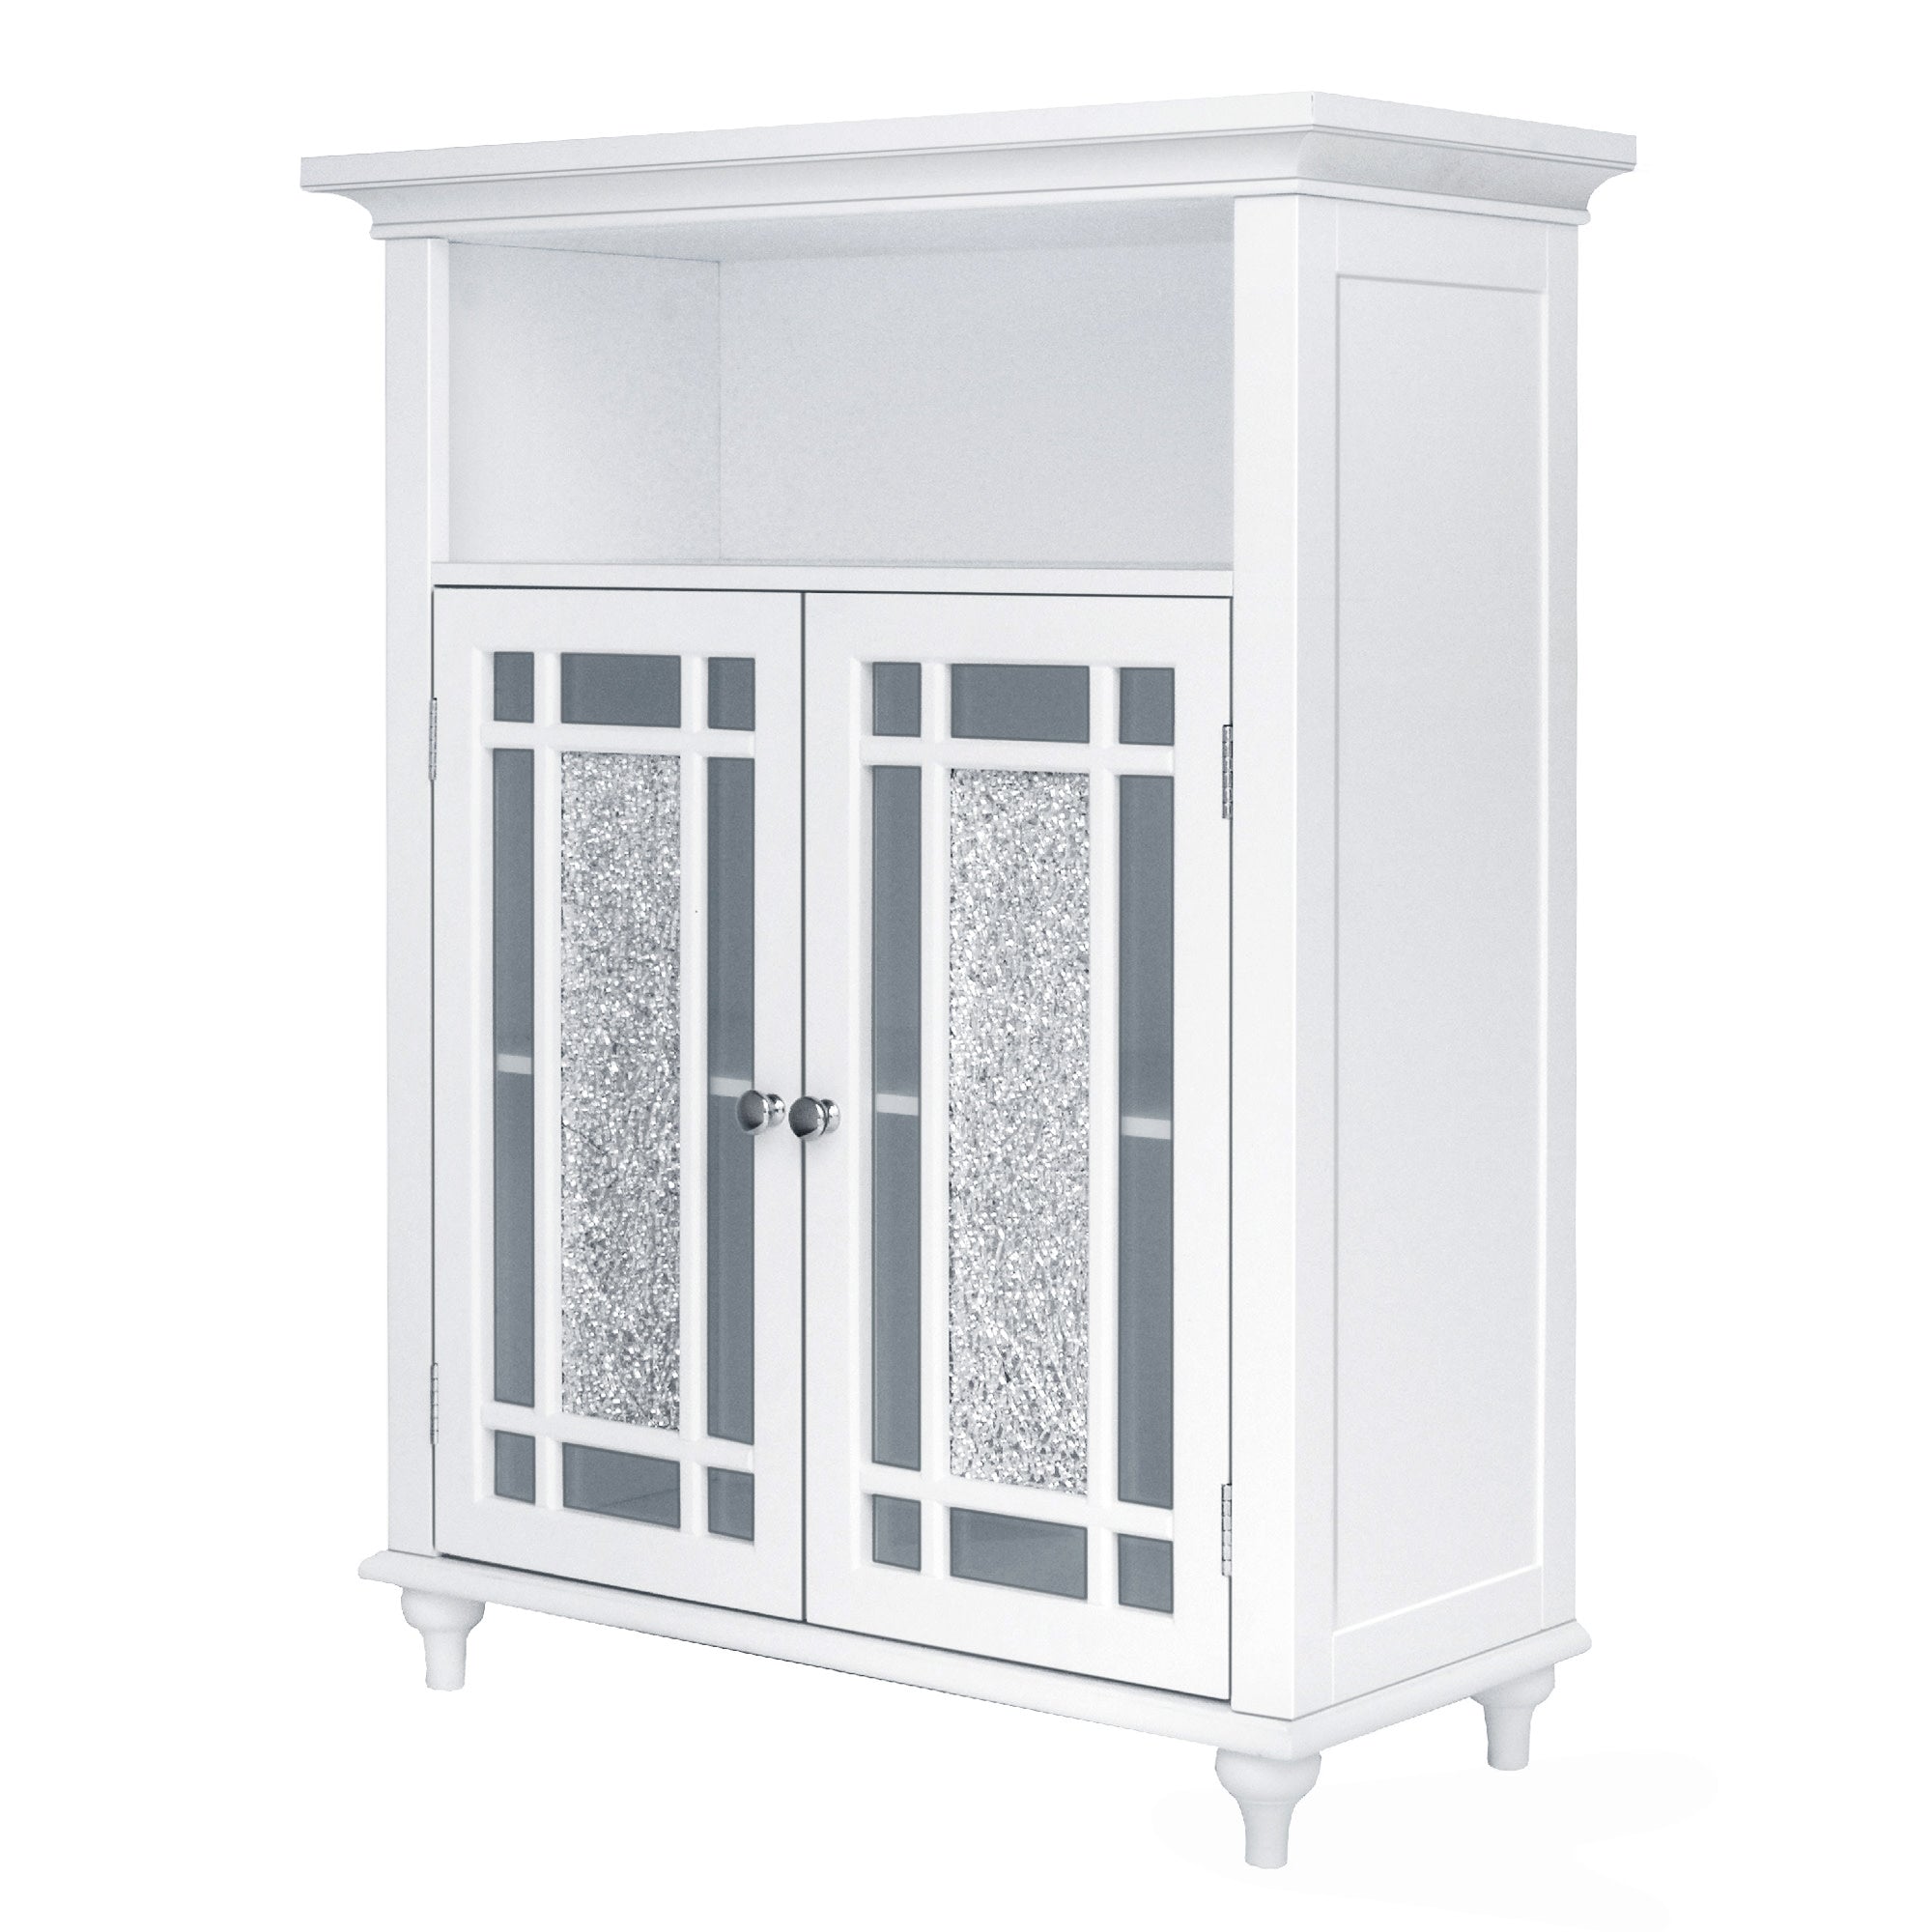 Teamson Home Windsor Wooden Floor Cabinet with Glass Mosaic Doors, White